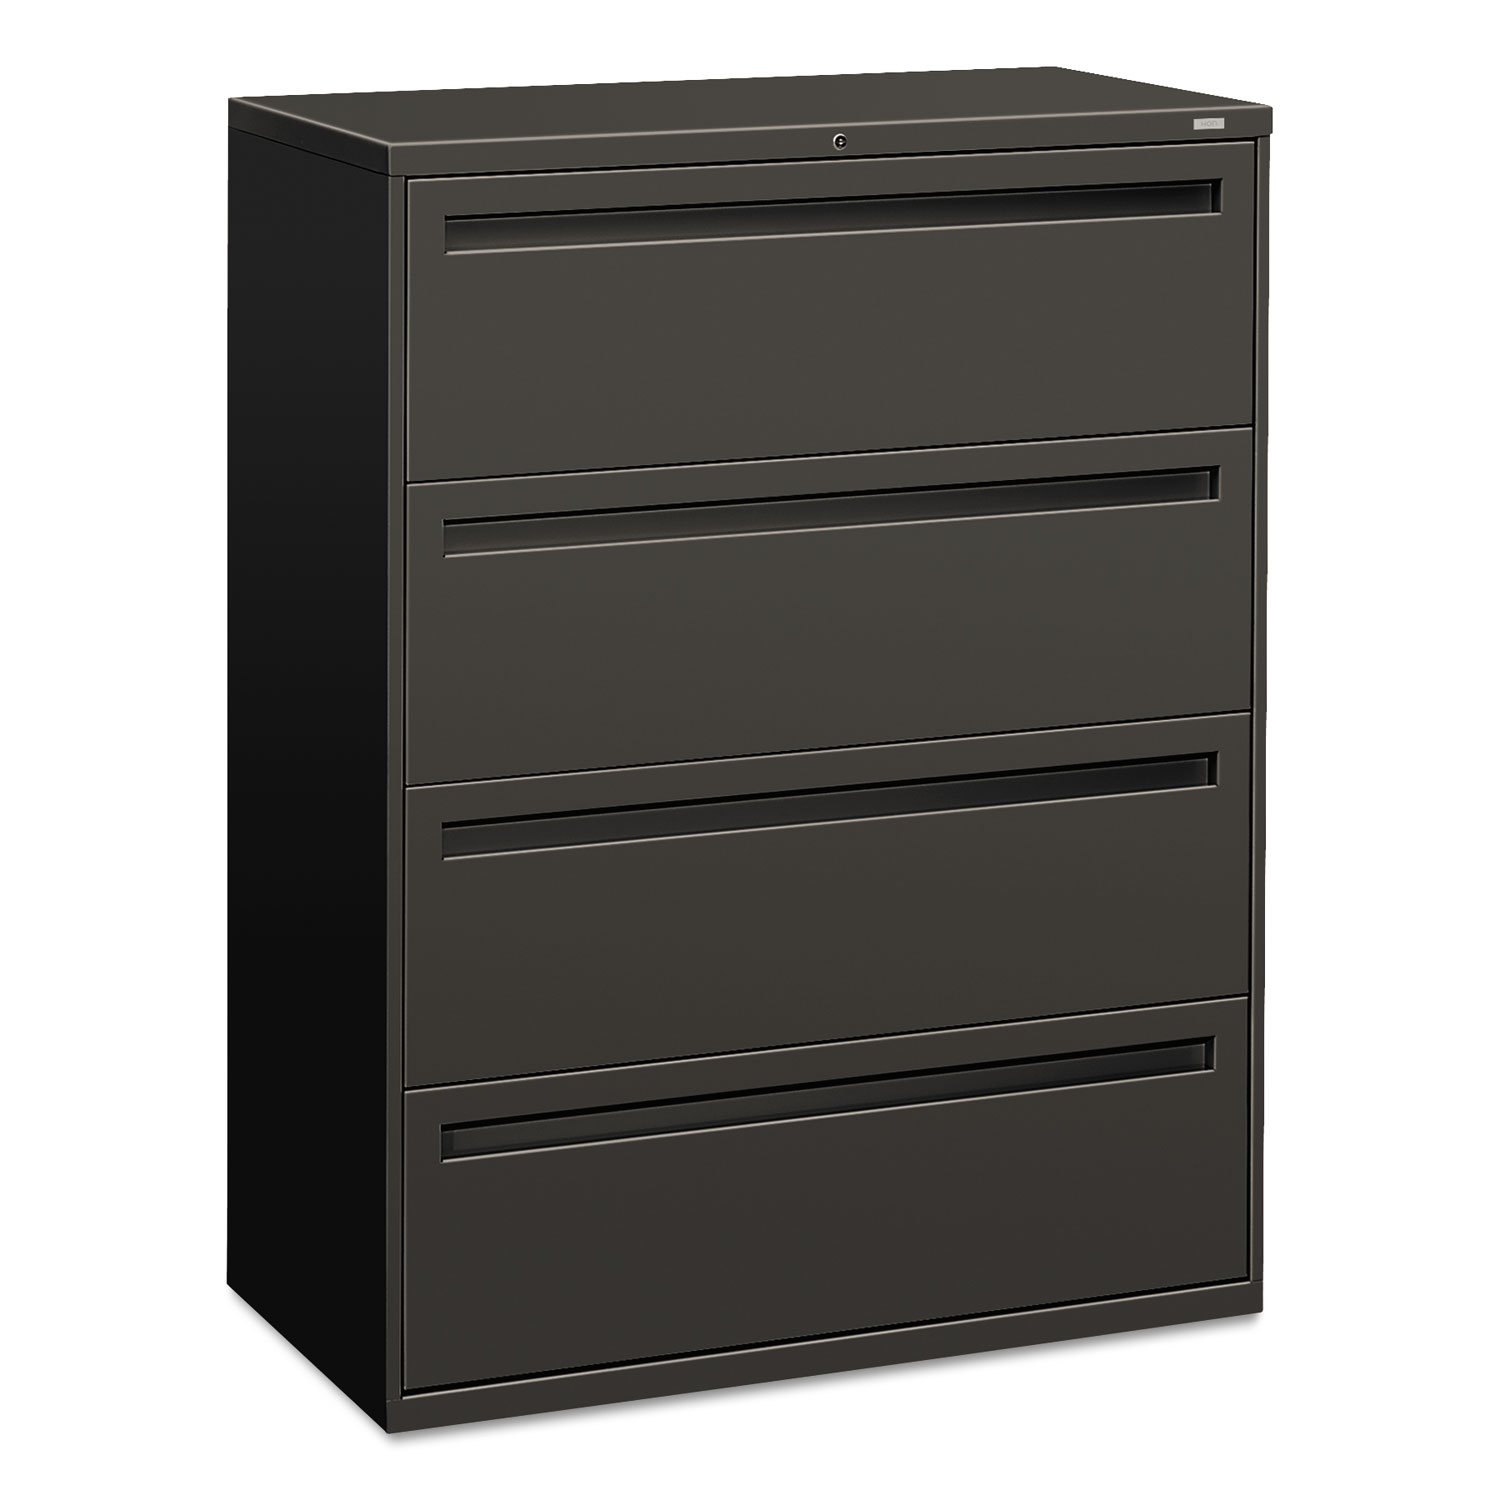  HON H794.L.S 700 Series Four-Drawer Lateral File, 42w x 18d x 52.5h, Charcoal (HON794LS) 